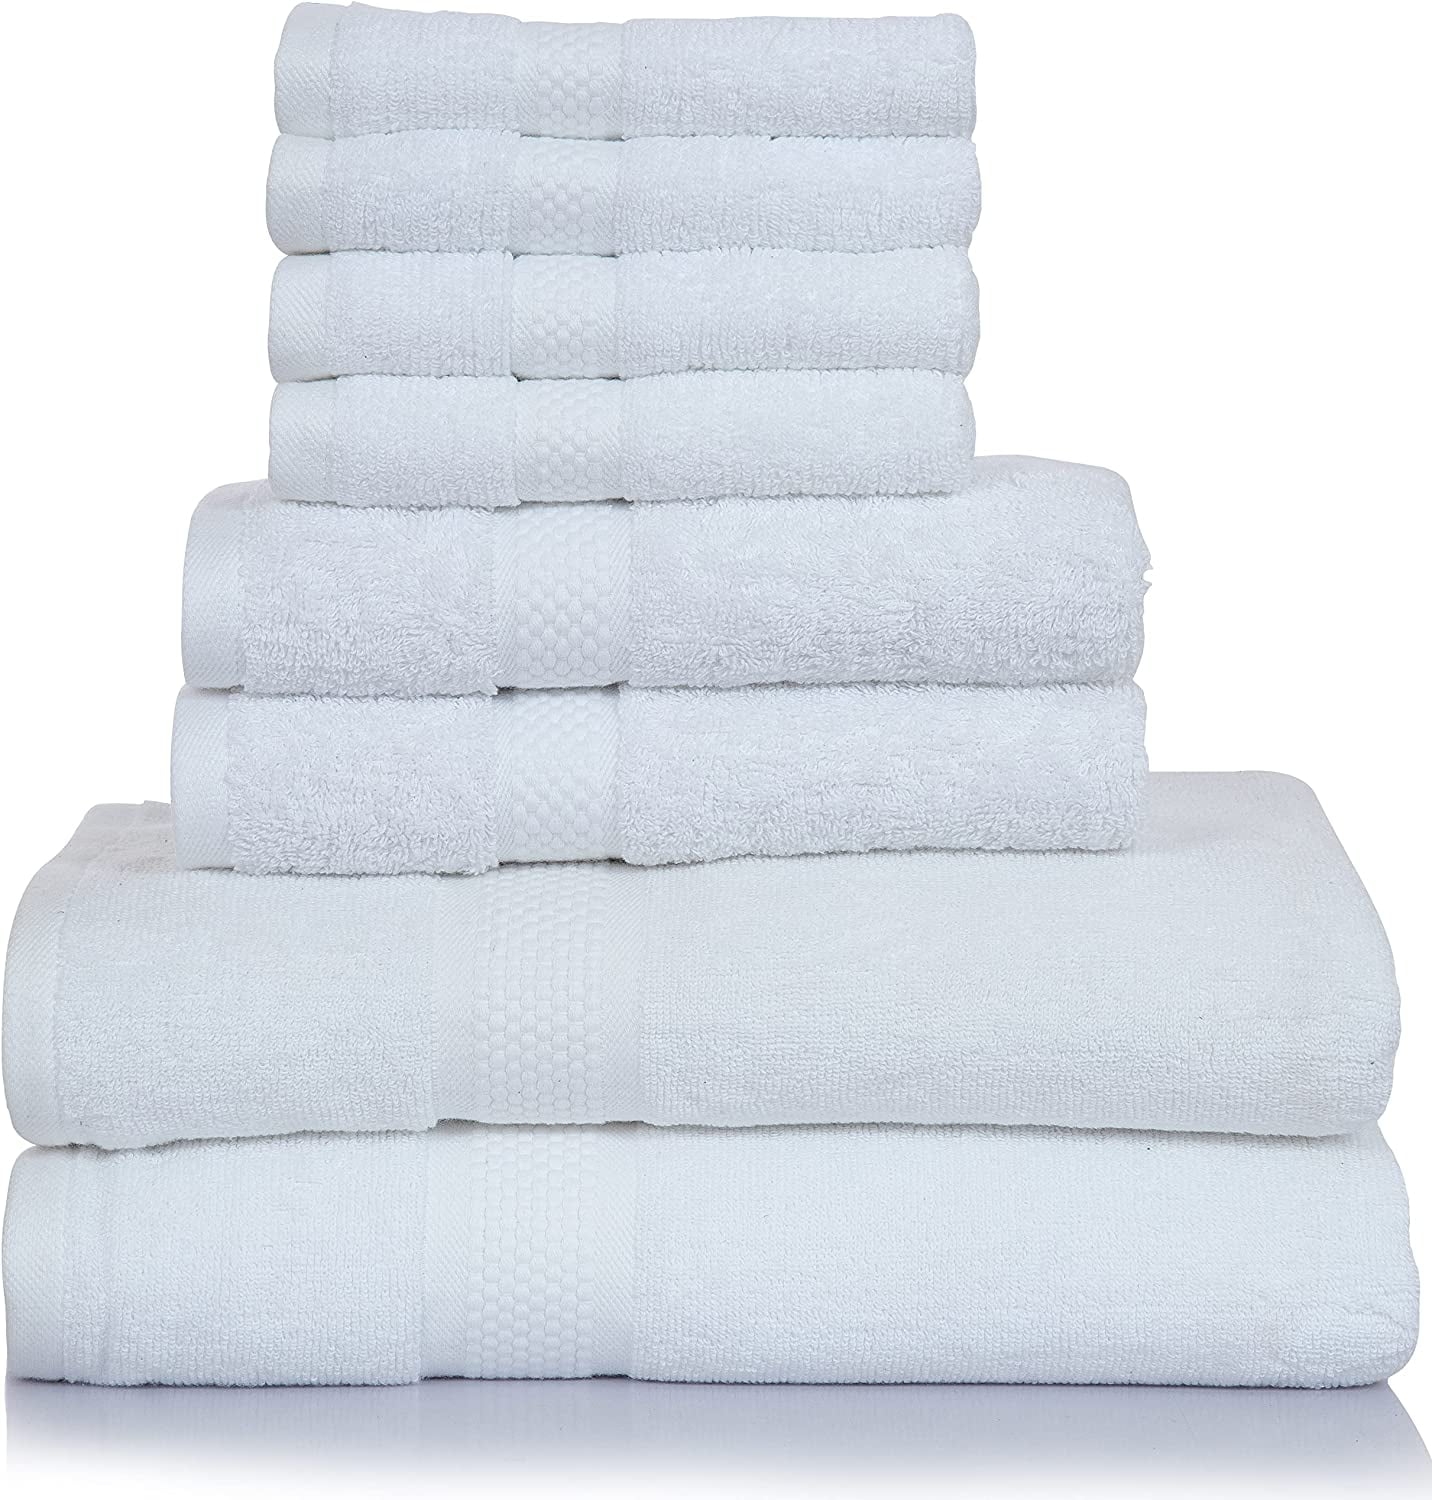 8 Piece Oversized White Bath Towel Set-2 Extra Large Bath Towel Sheets,2  Hand Towels,4 Washcloths-600GSM Soft Highly Absorbent Quick Dry Beach Chair